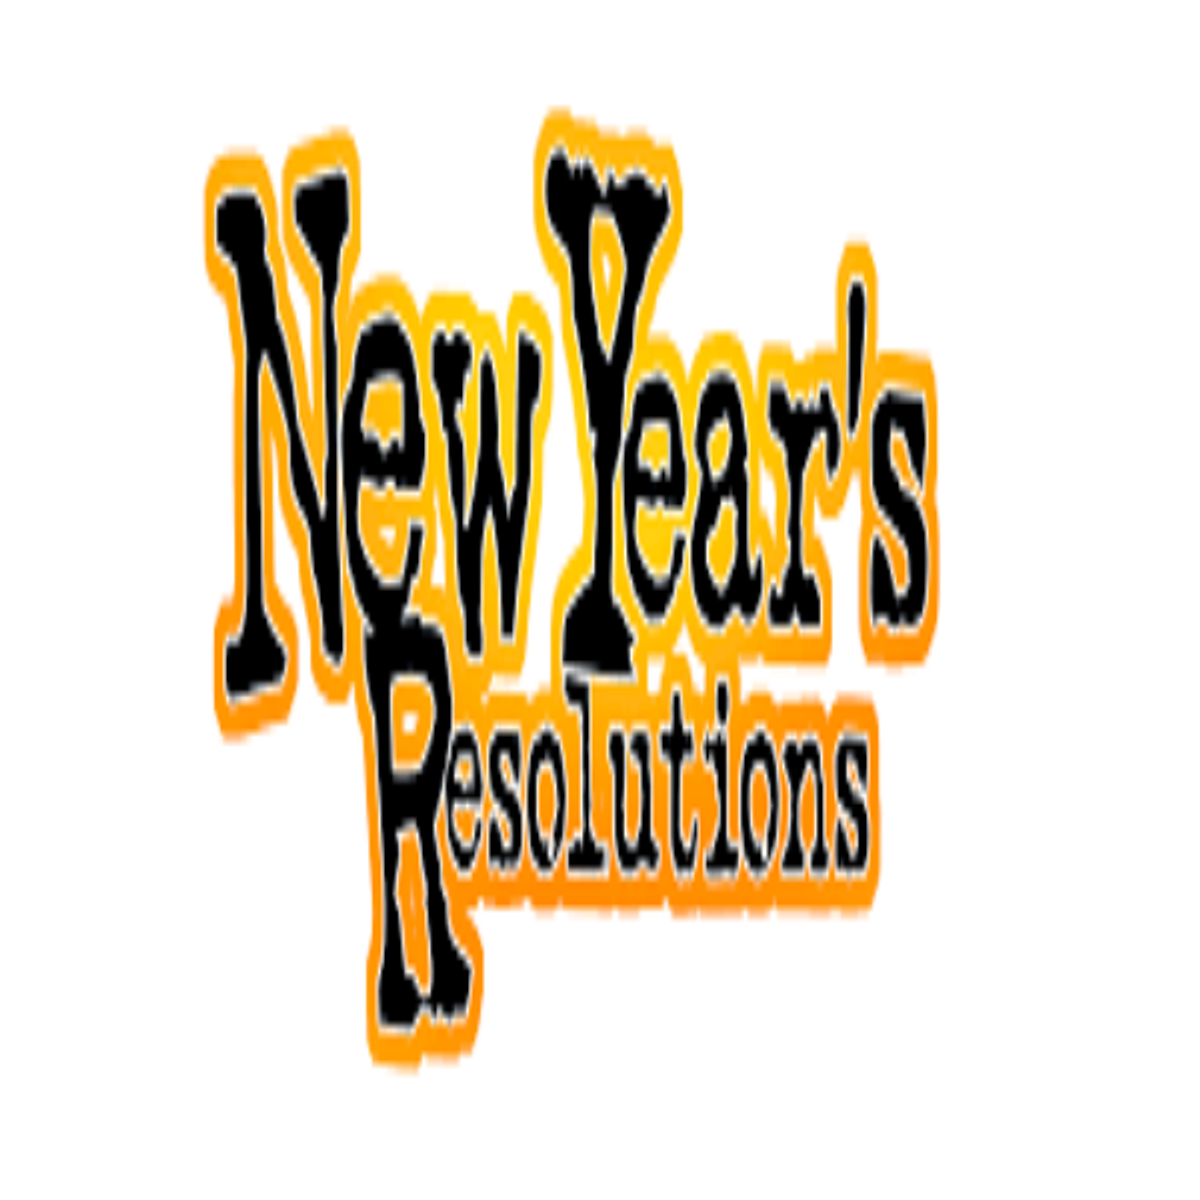 10 Most Said New Years Resolutions!